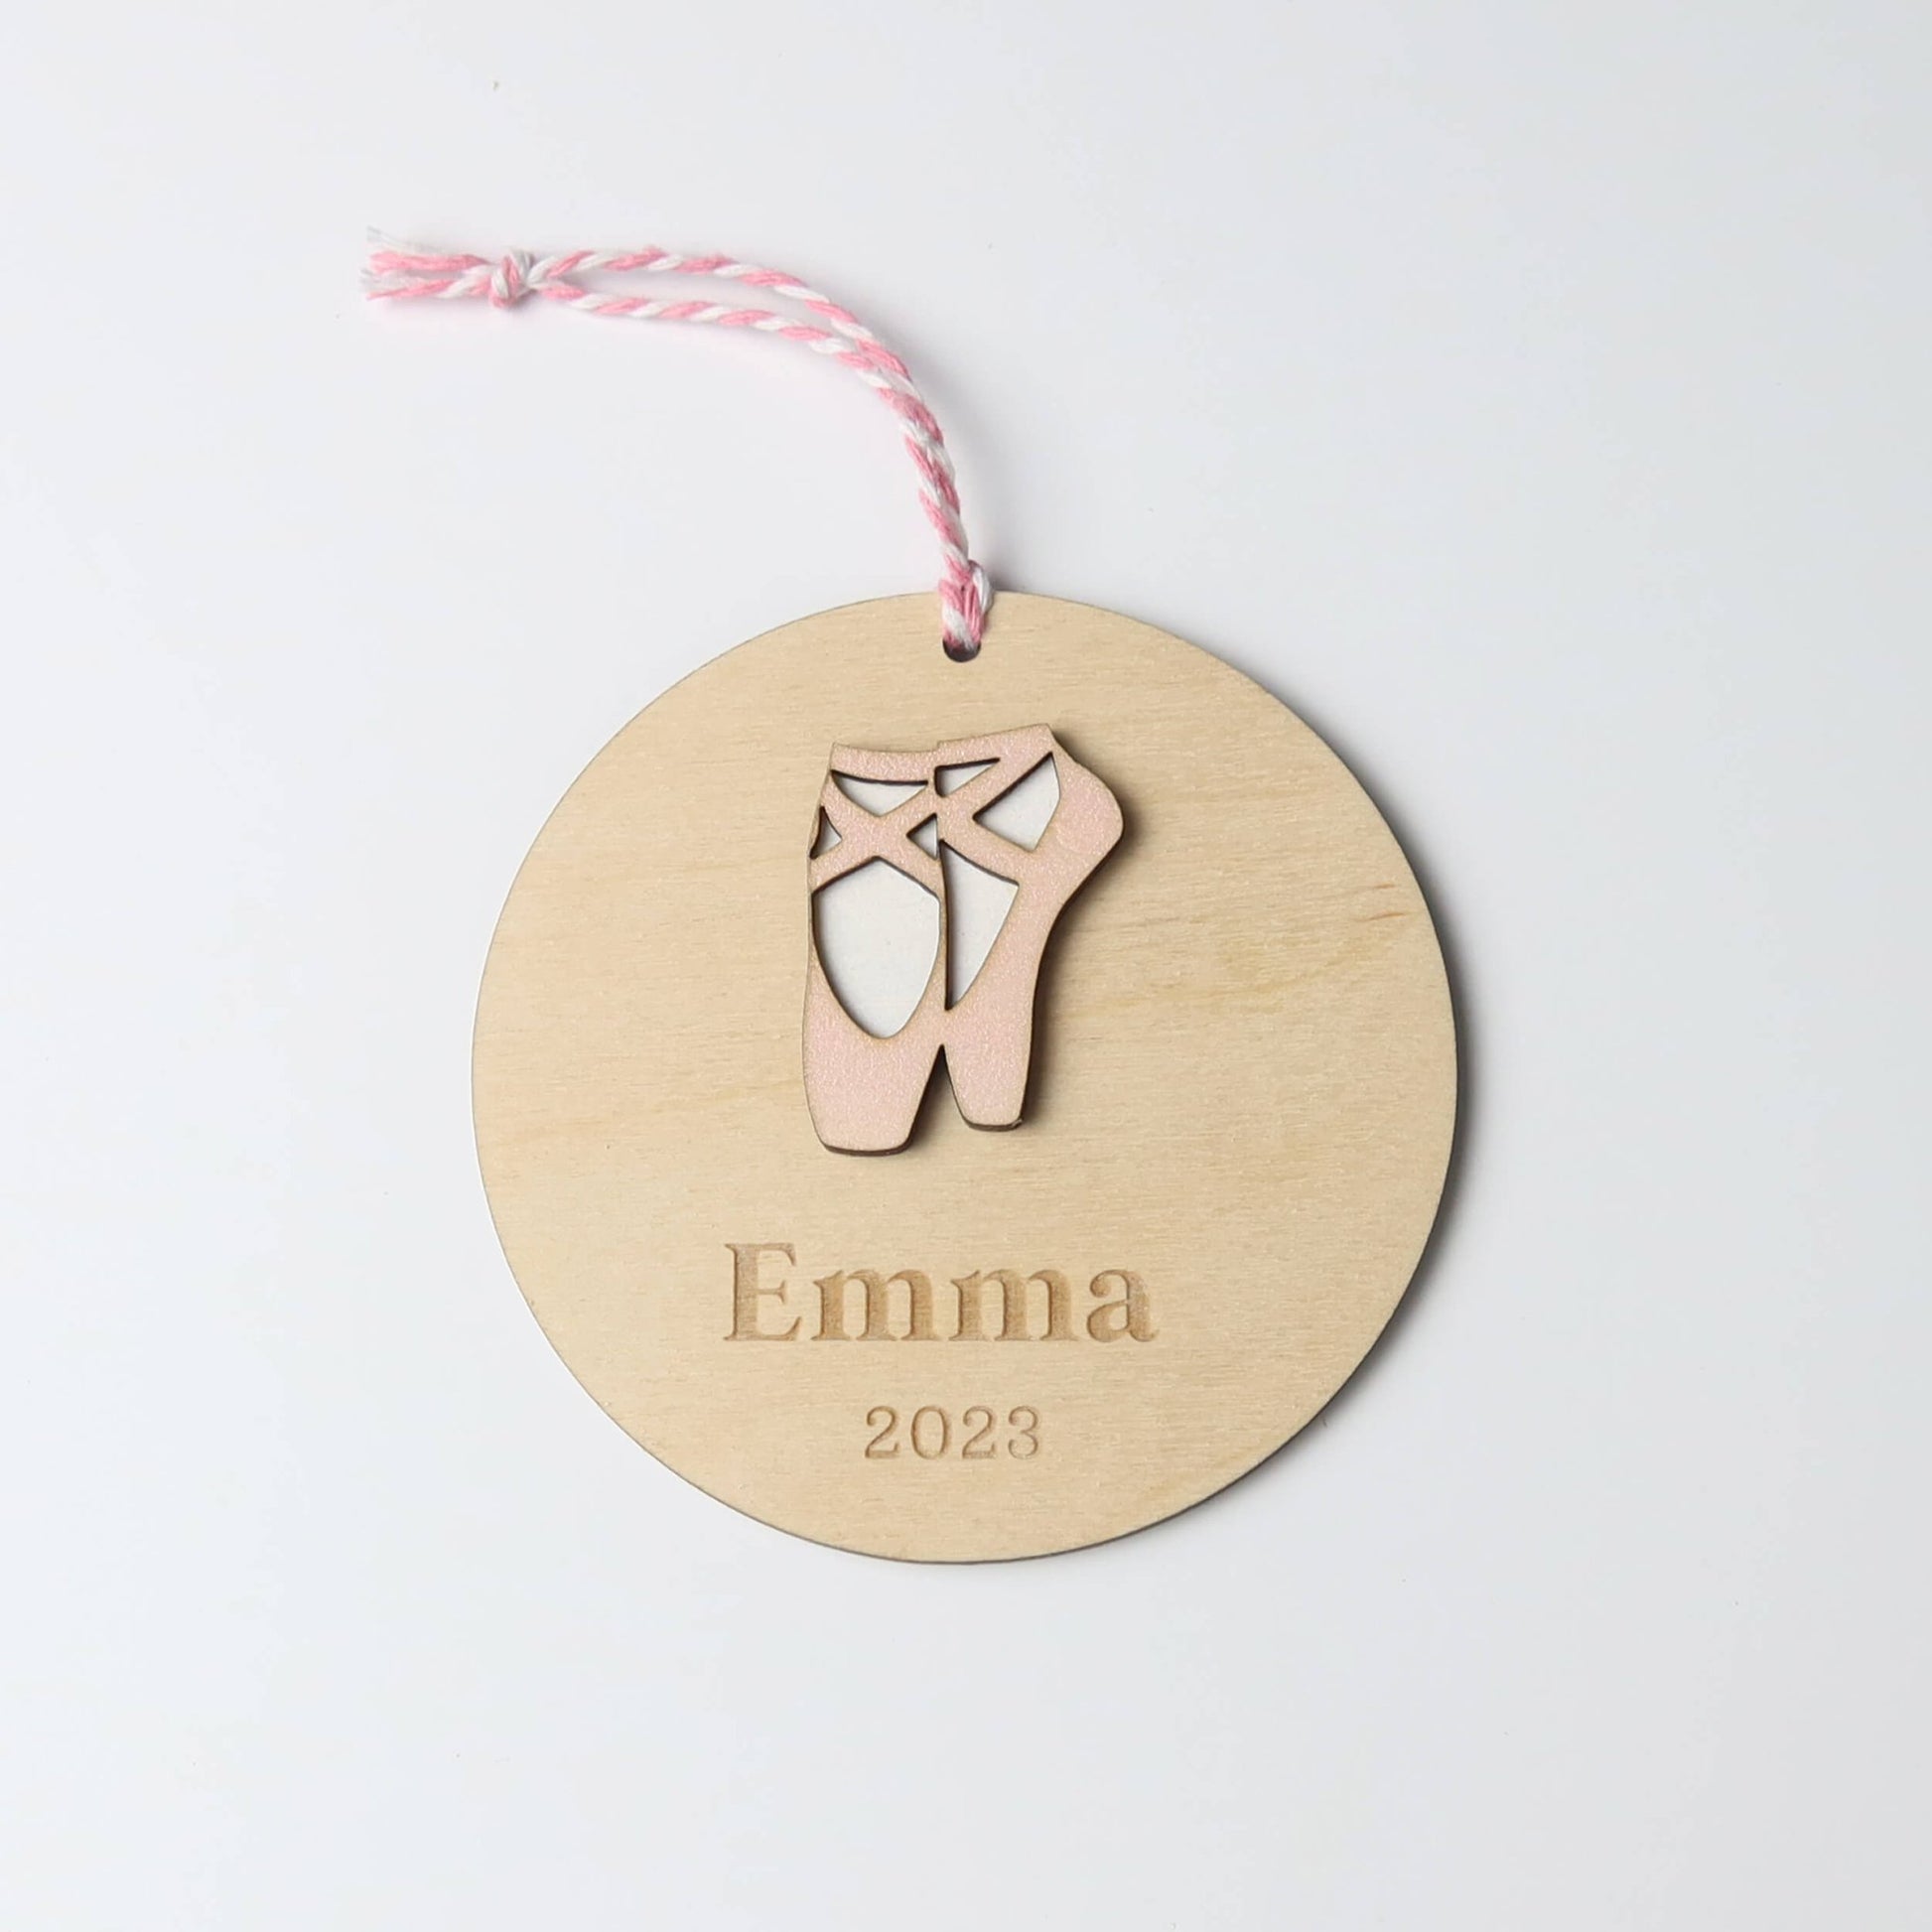 Personalized Dance Ornament - Holiday Ornaments - Moon Rock Prints